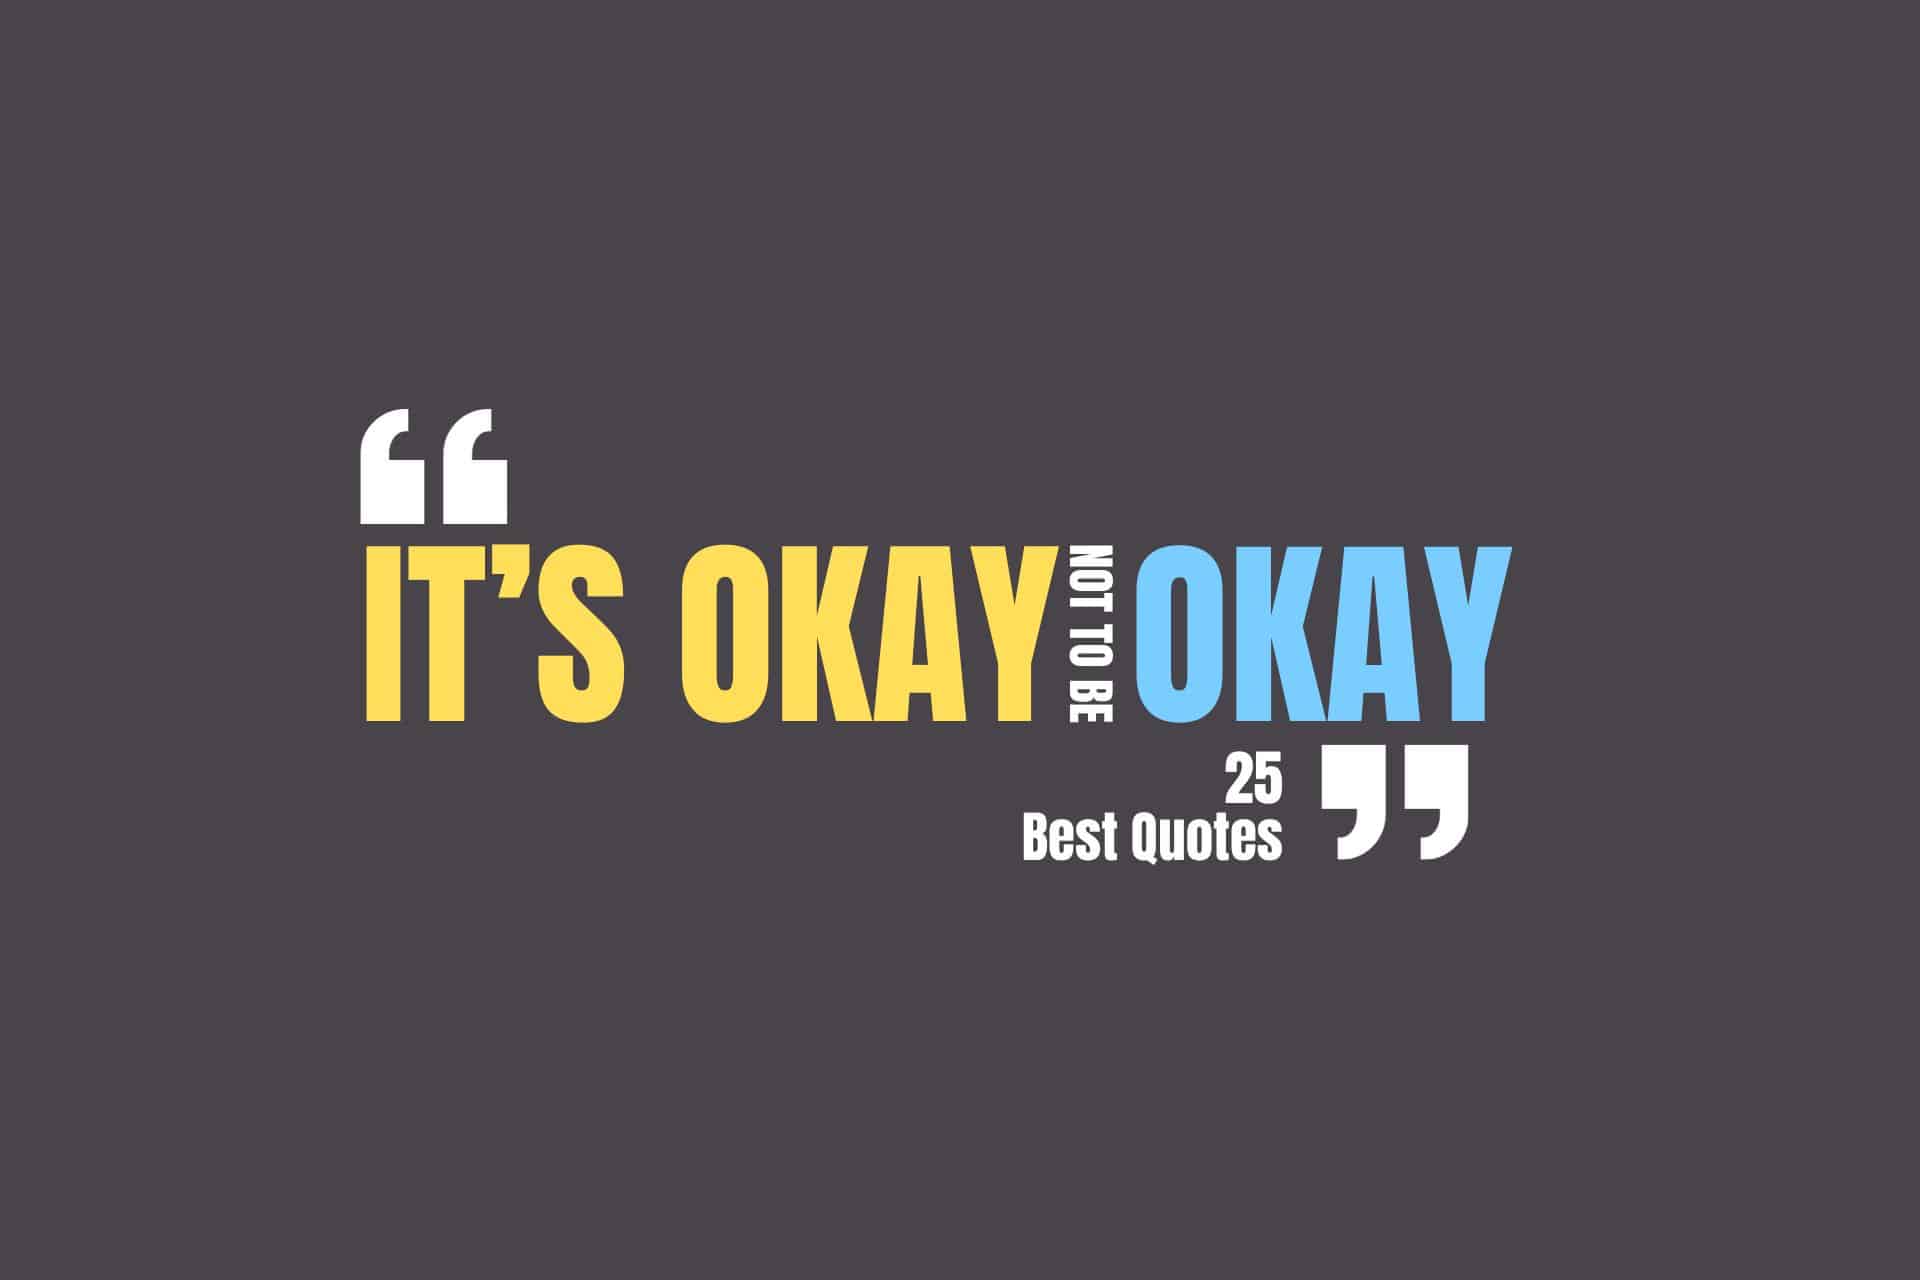 It's okay not to be okay quotes